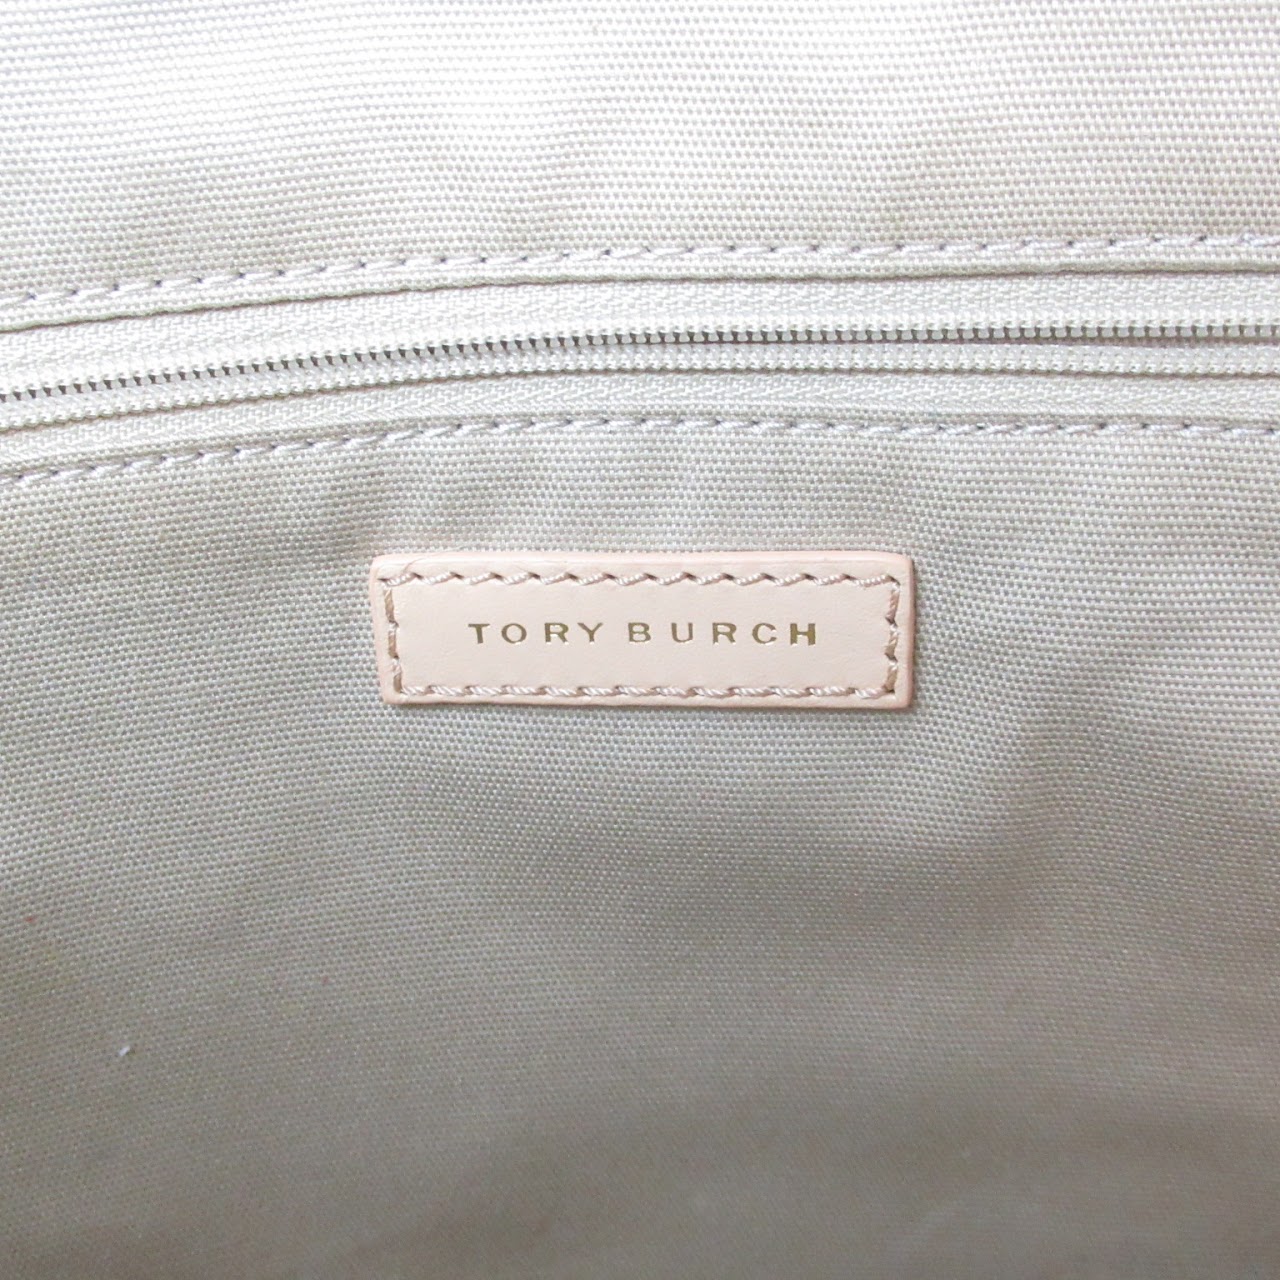 Tory Burch Ombre Canvas Tote